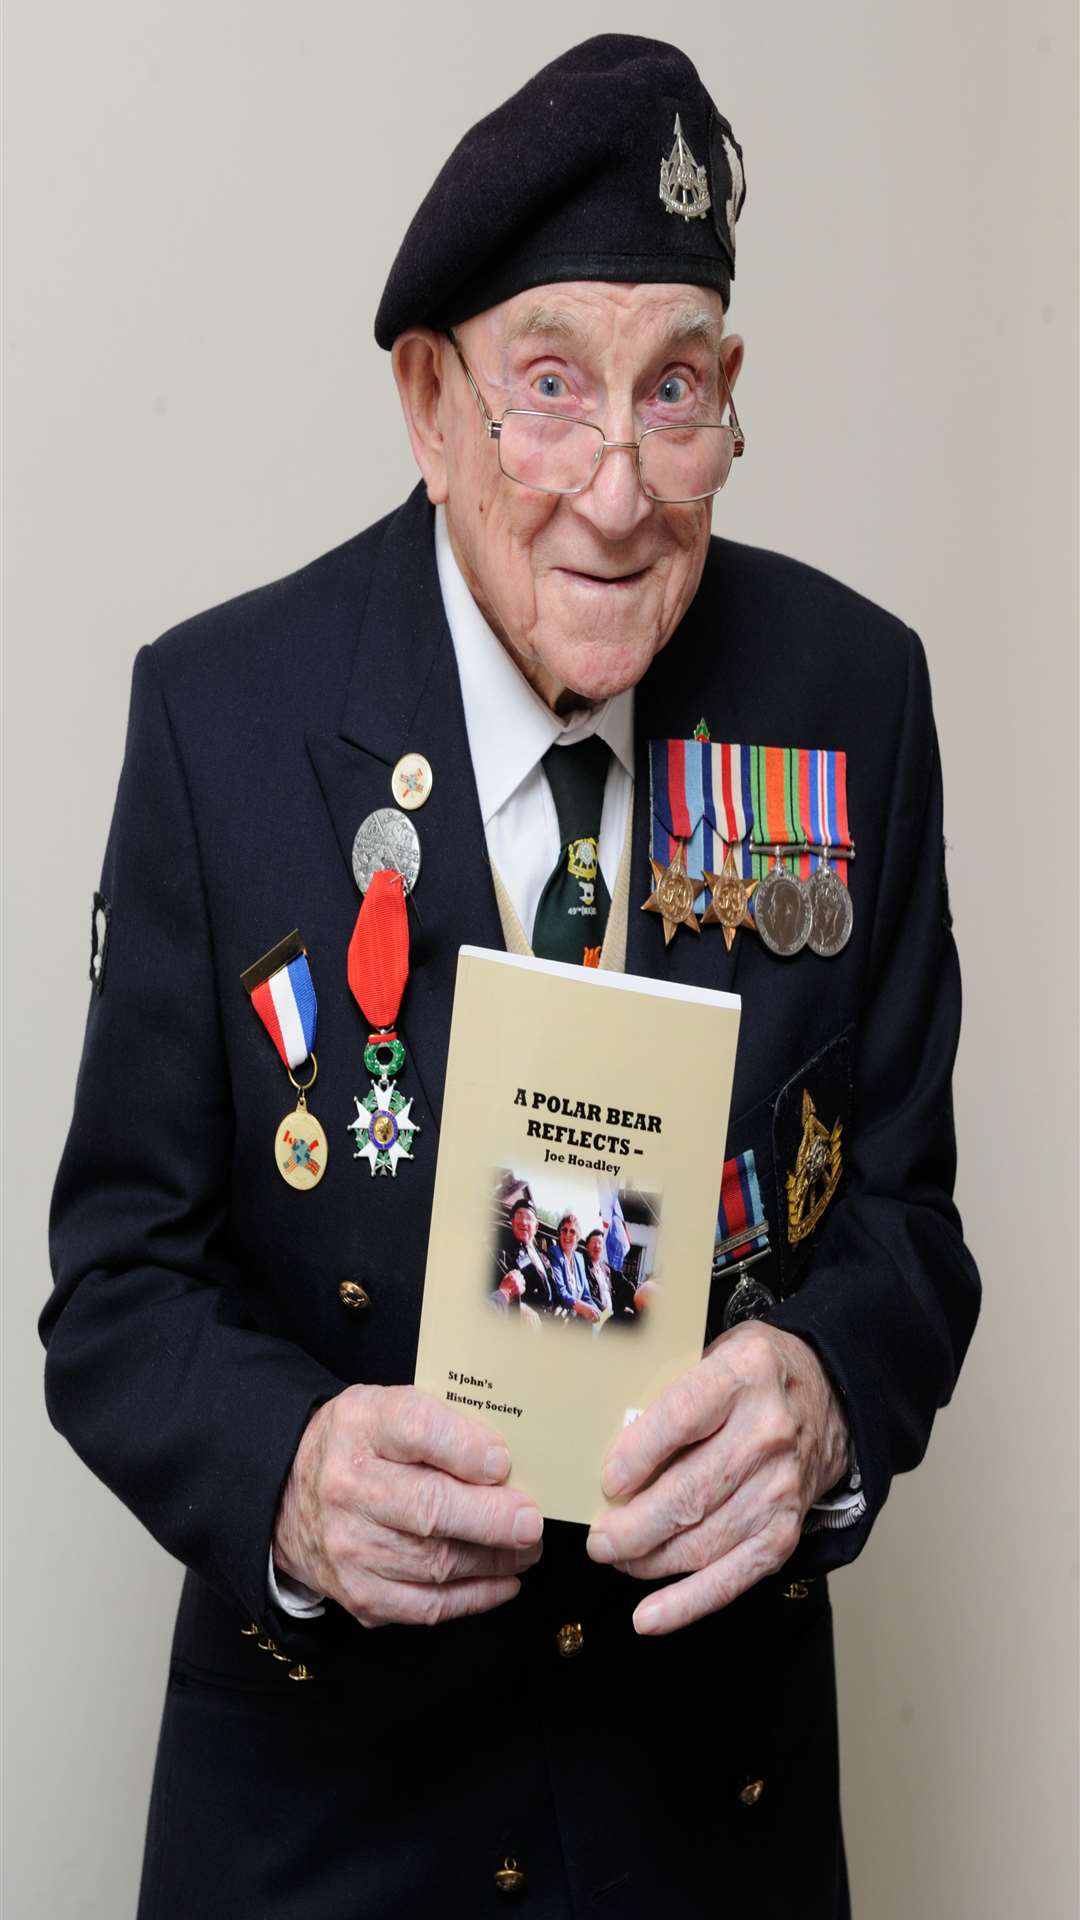 Joe Hoadley has received the Legion D'Honor from France, the country's highest honour.